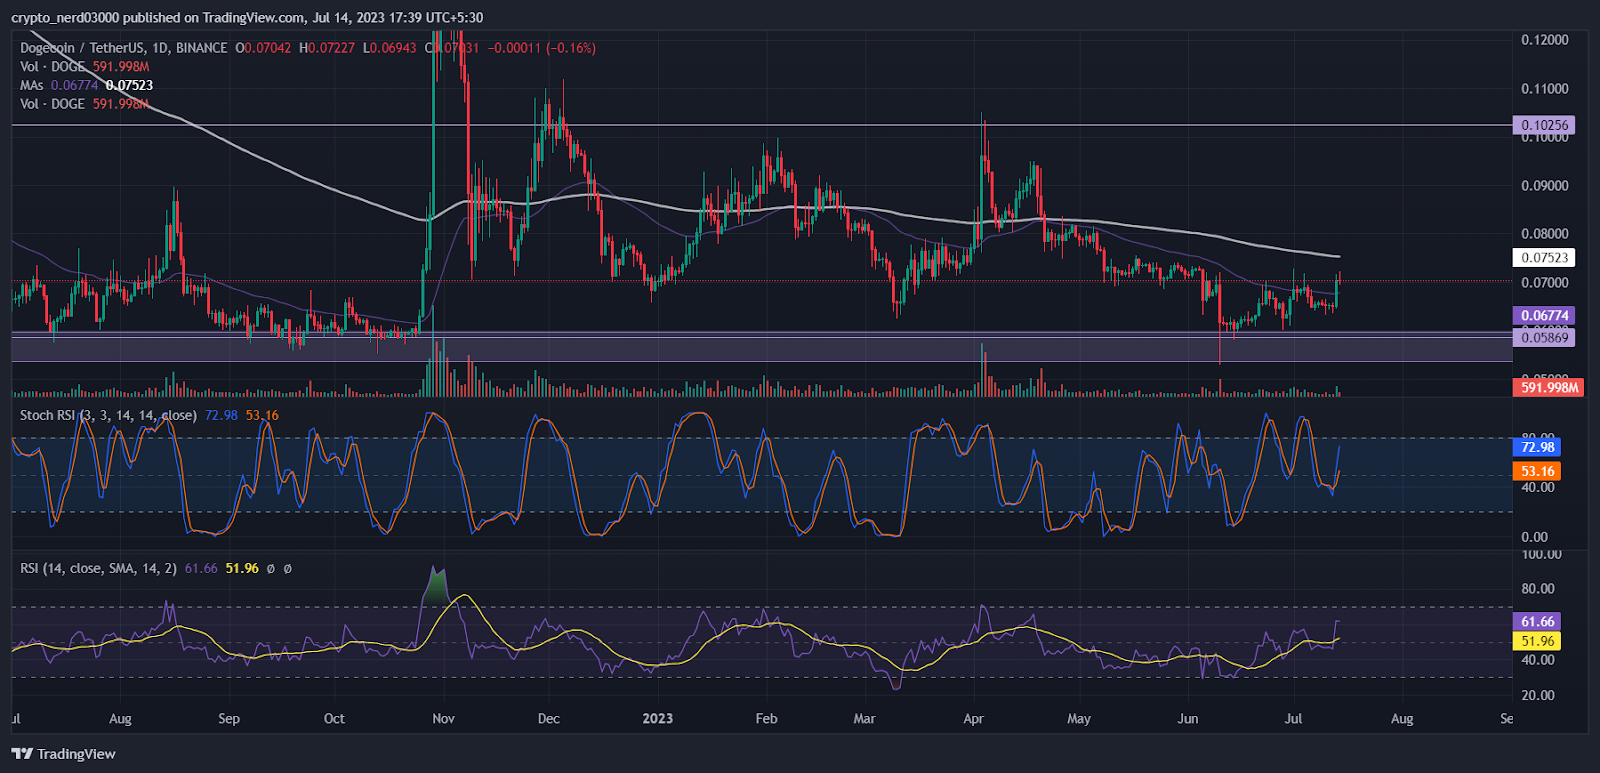 Dogecoin Price Prediction: Will Dogecoin Make A Breakout?